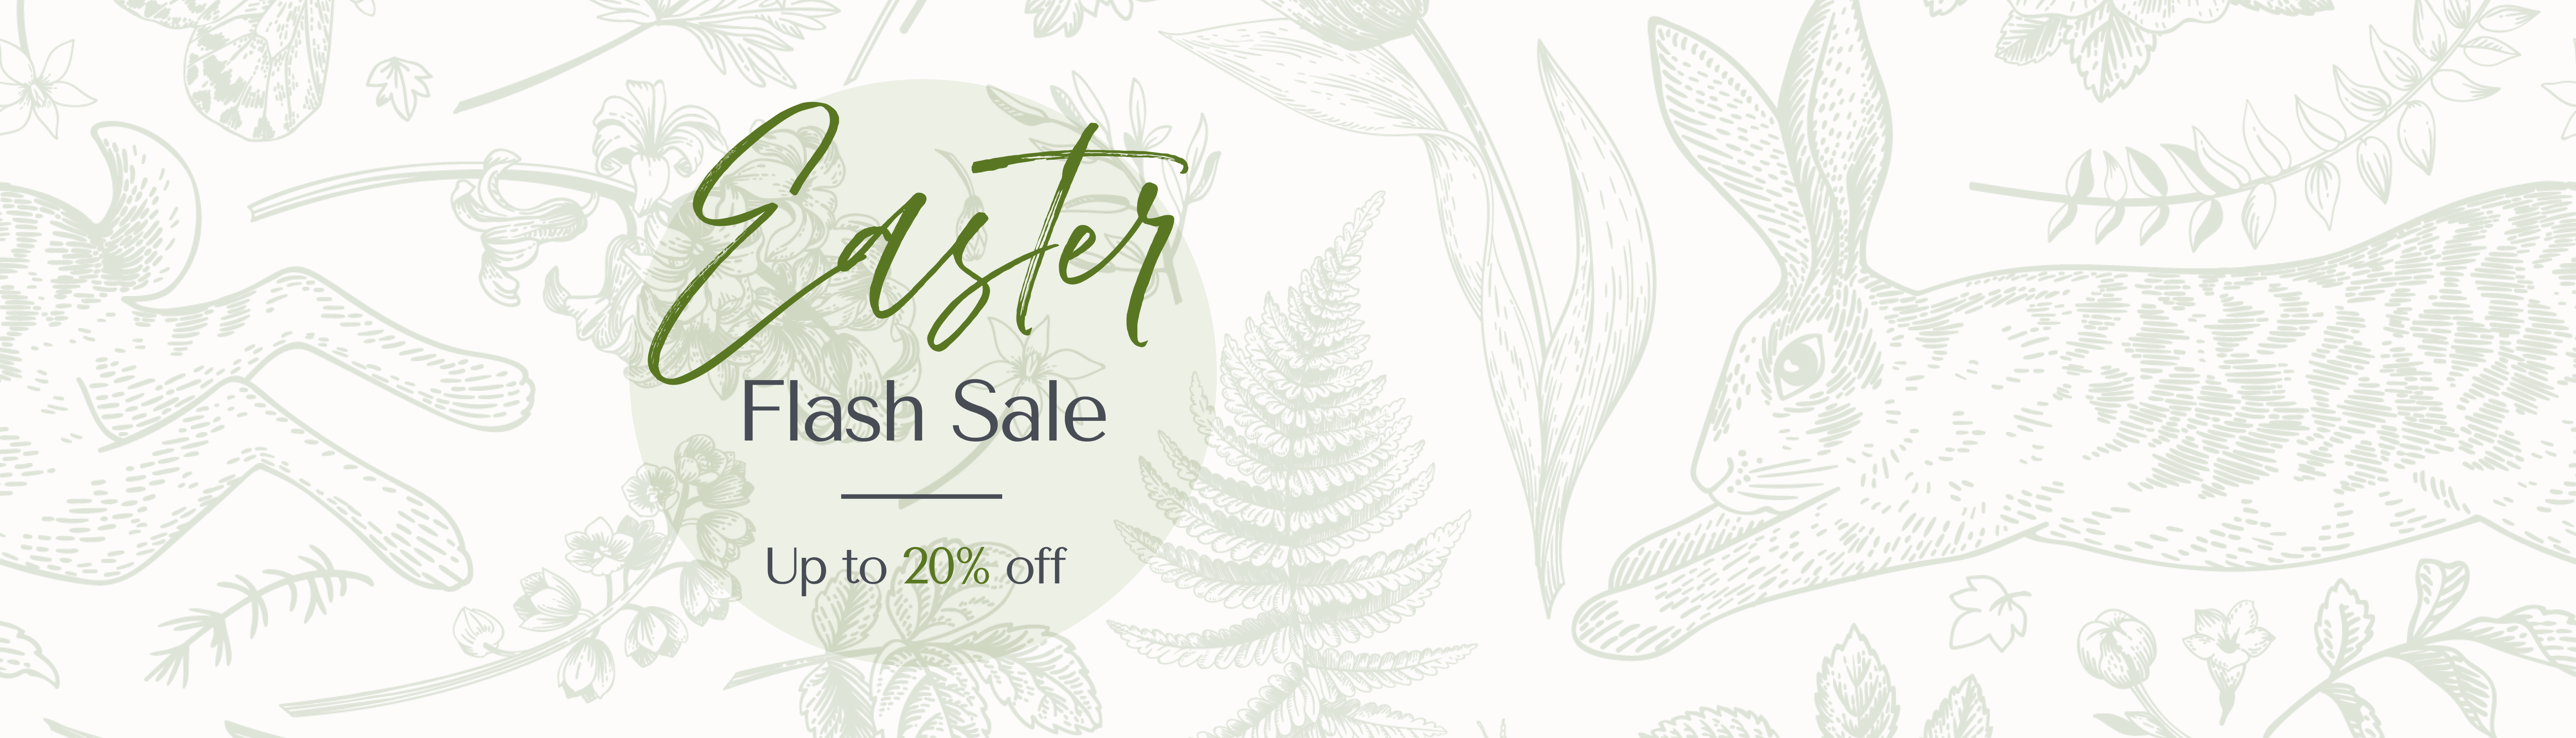 C_A_-_March_Social_-_Easter_Flash_Sale_-_Web_Banner.png